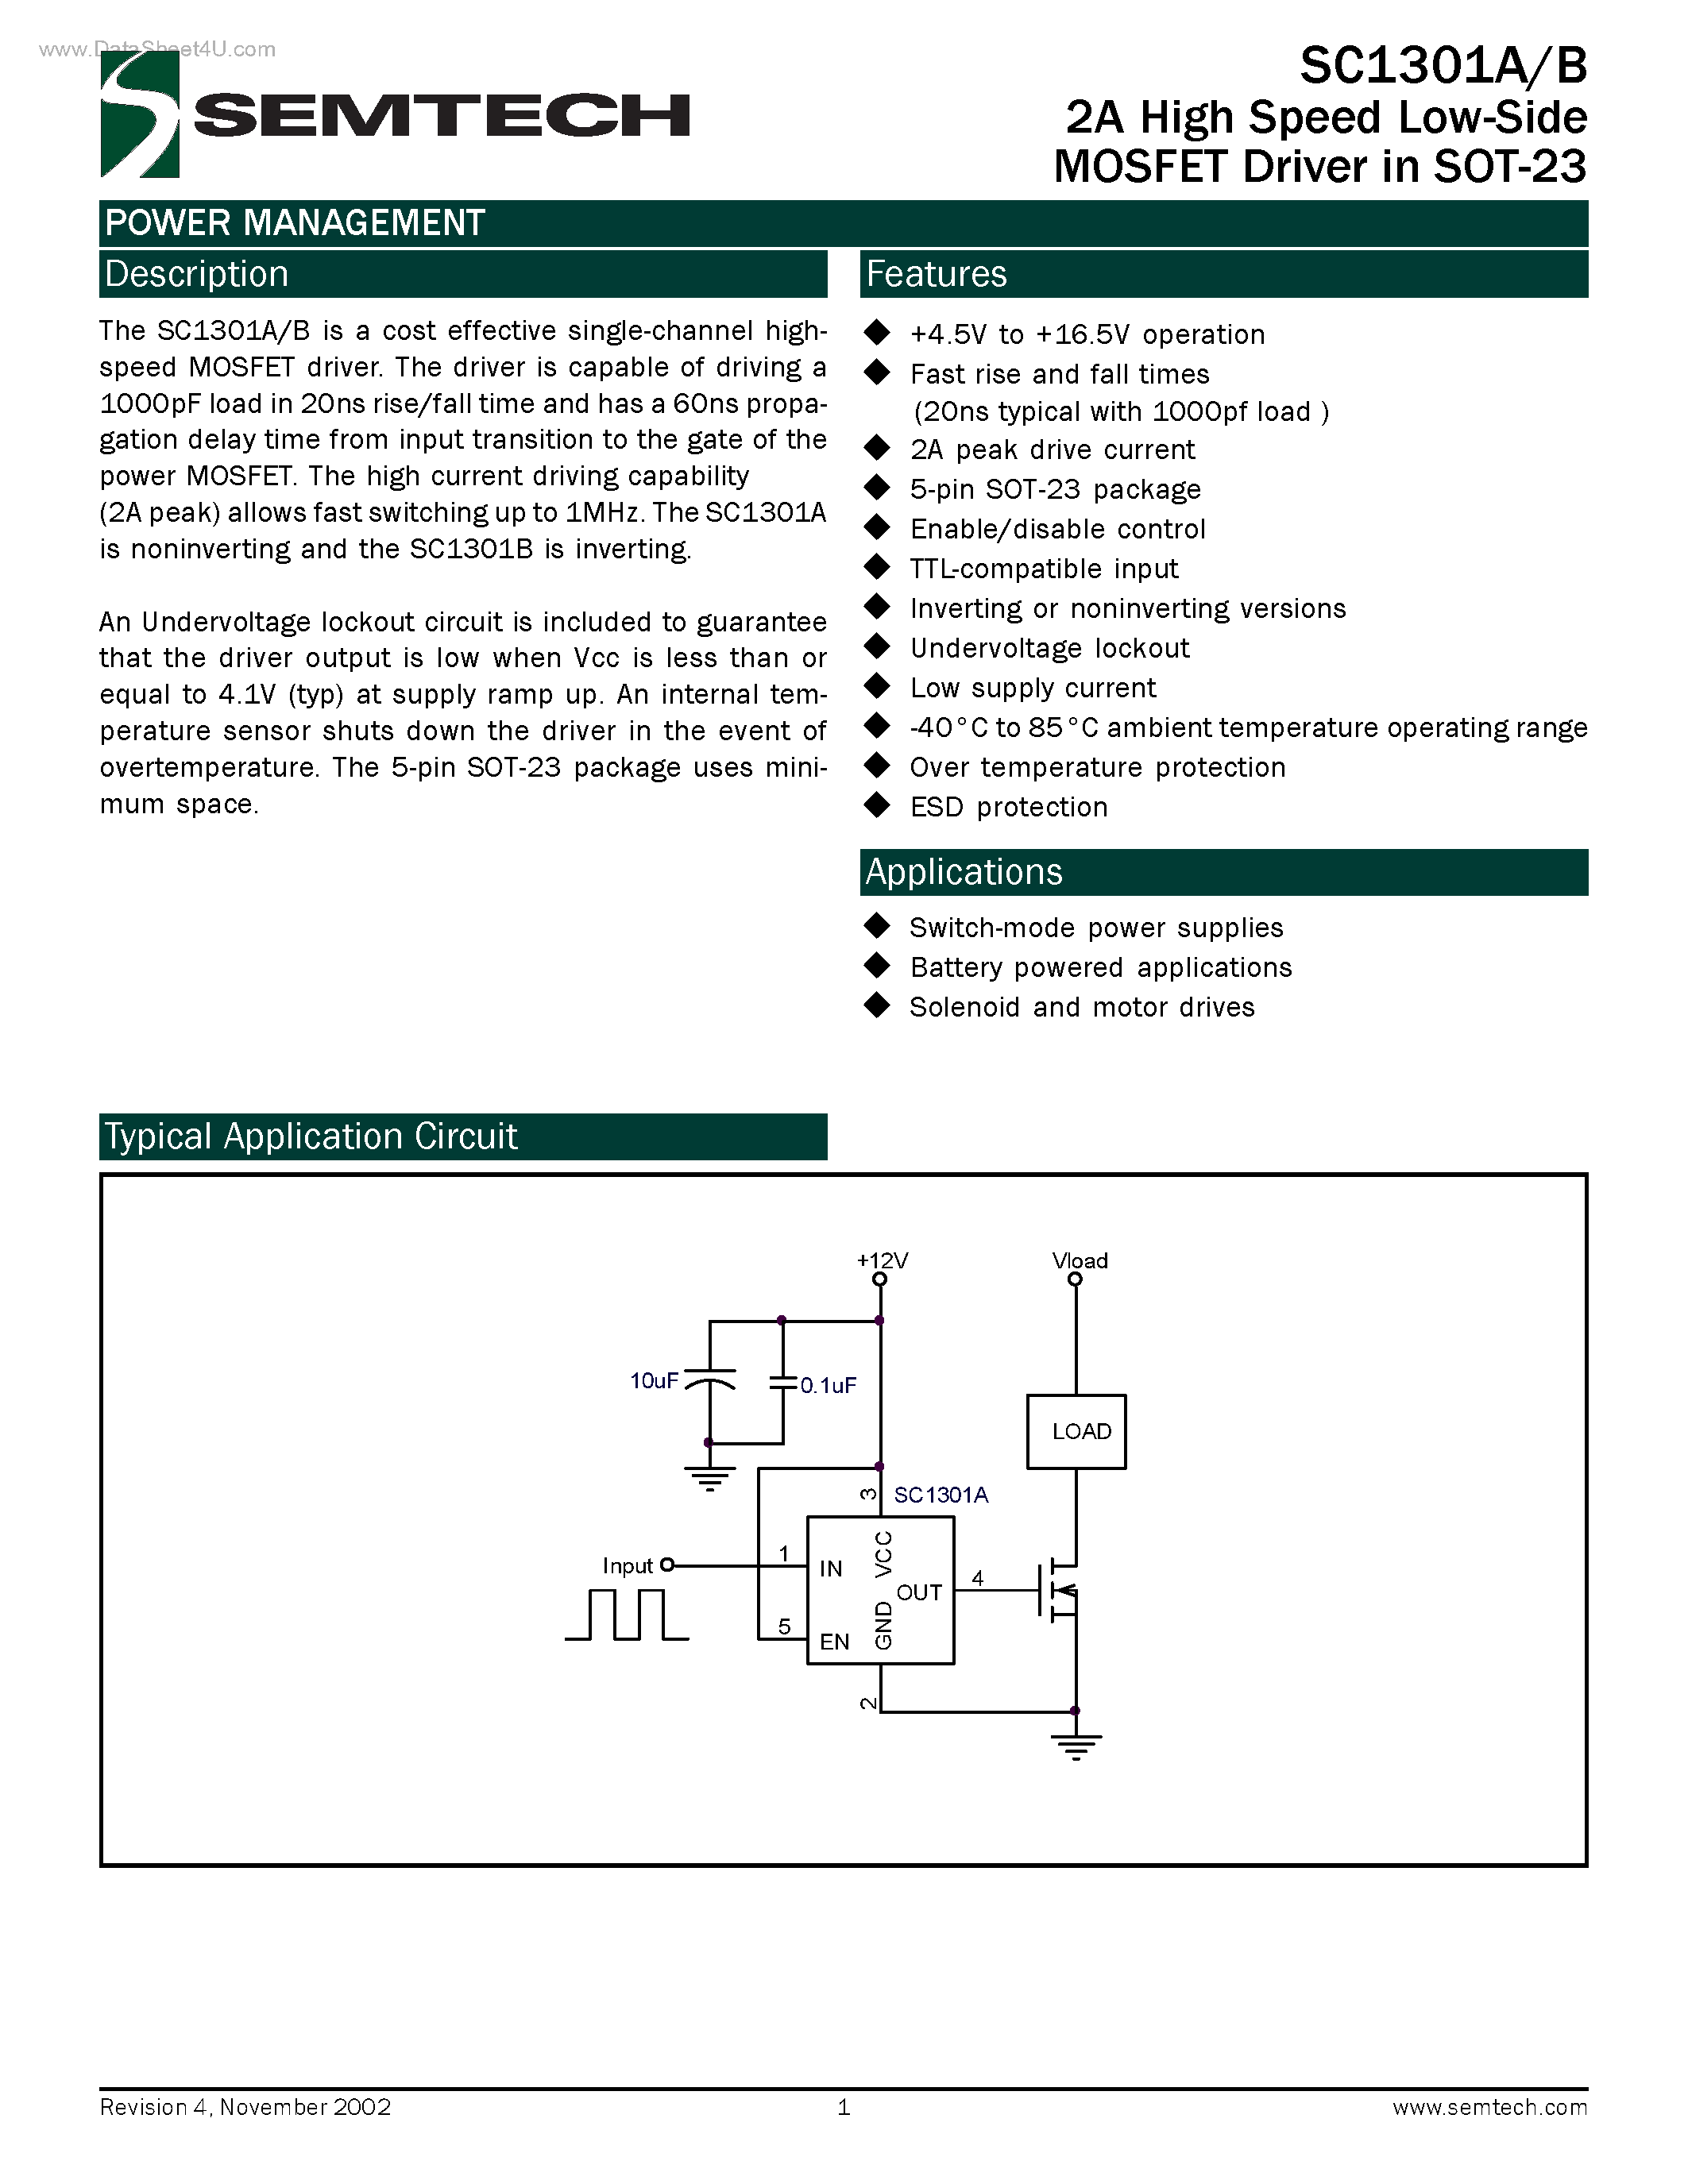 Datasheet SC1301A - (SC1301A/B) High Speed Low-Side MOSFET Driver page 1